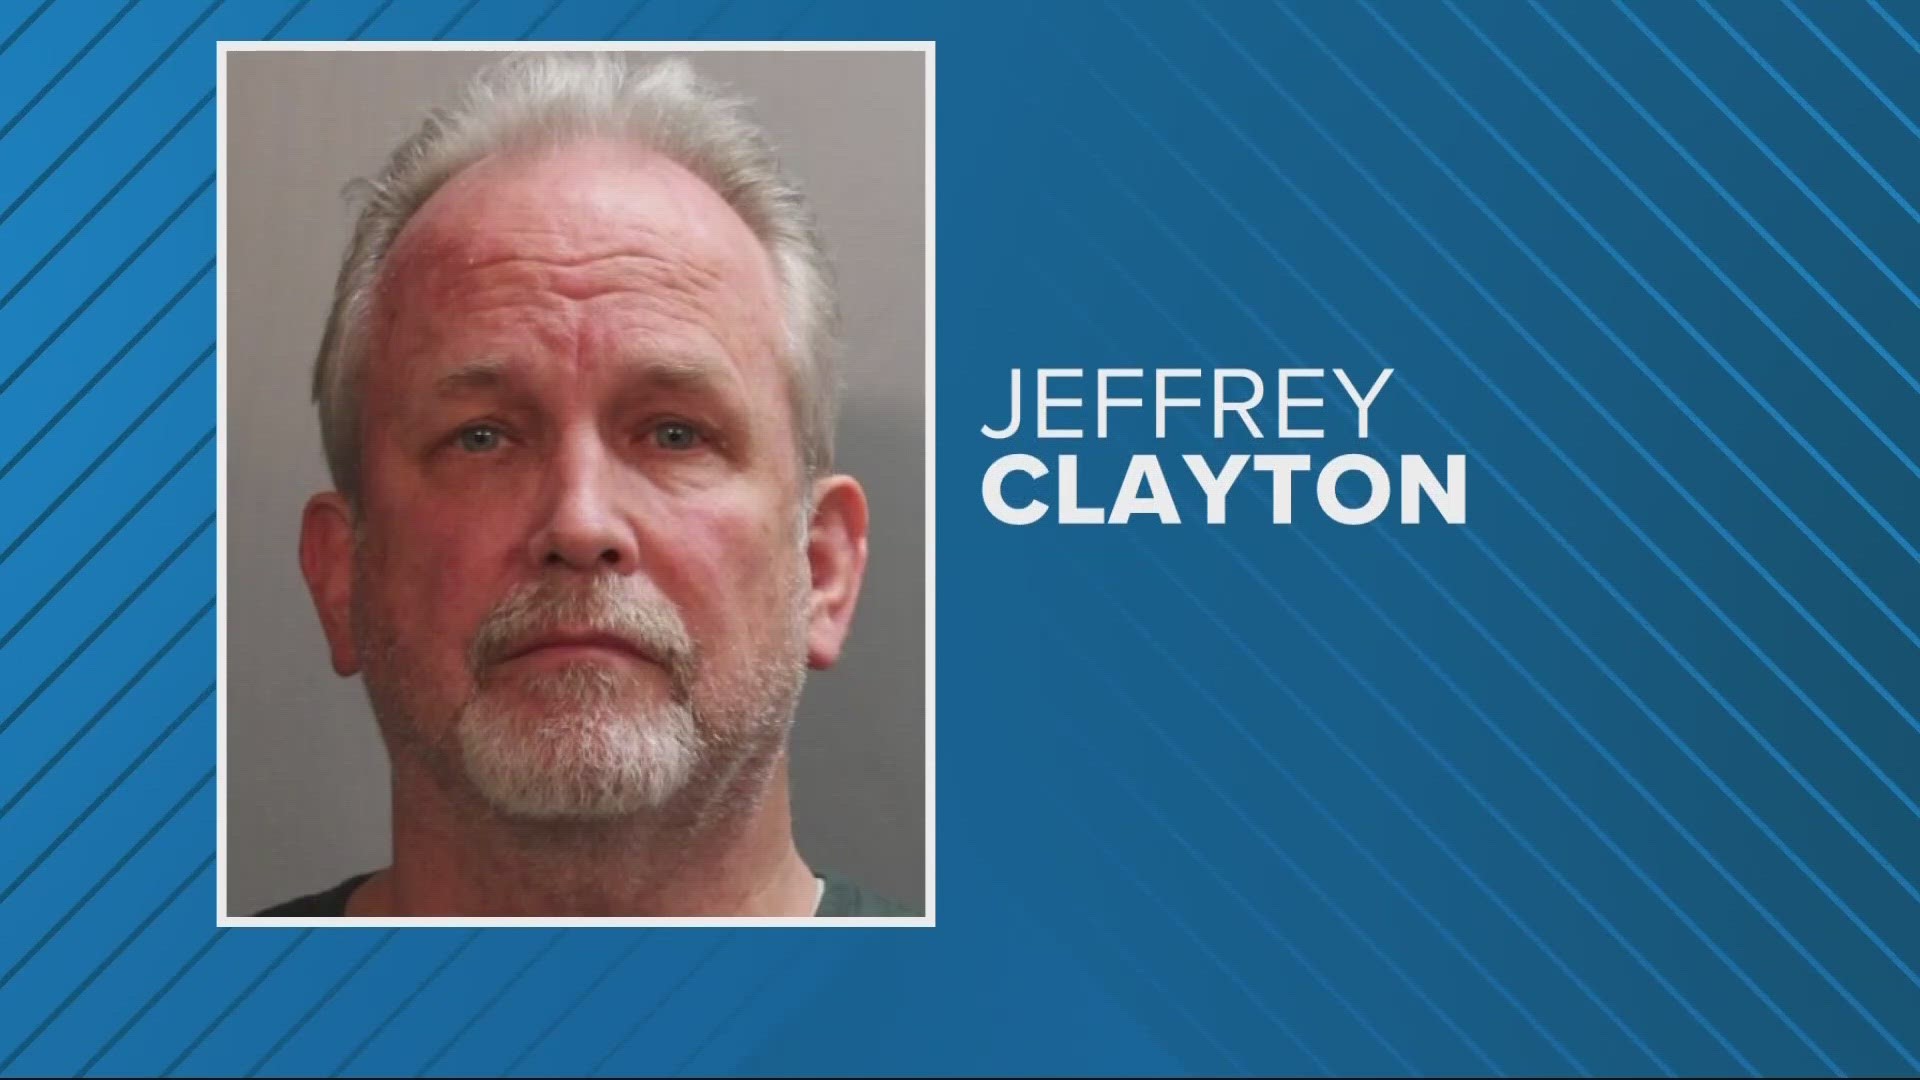 Jeffrey Clayton is accused of lewd behavior with a student.